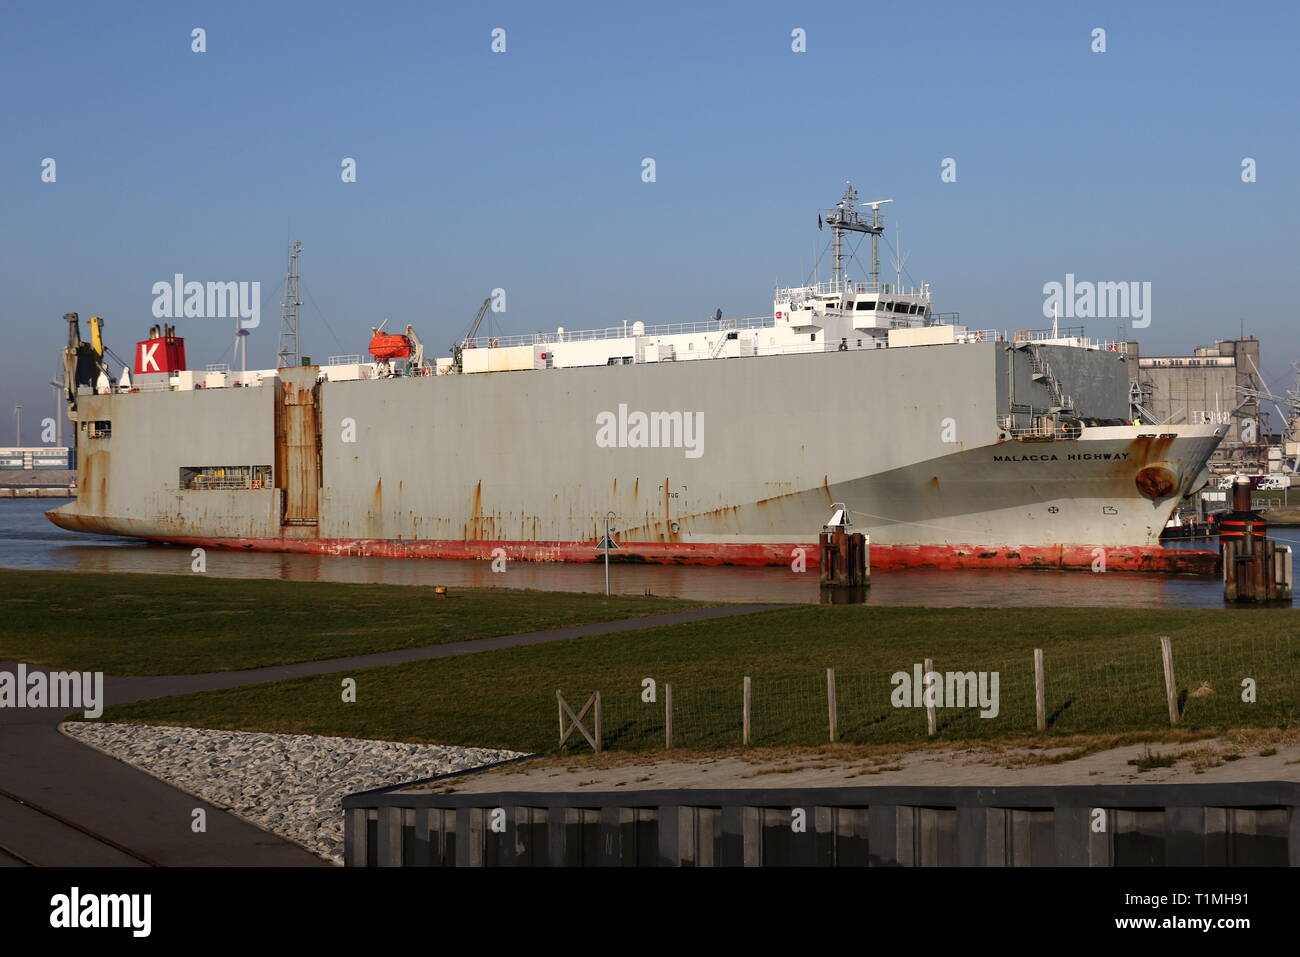 The Car carrier Malacca Highway reached on 17 February 2019 the lock of the port of Emden. Stock Photo